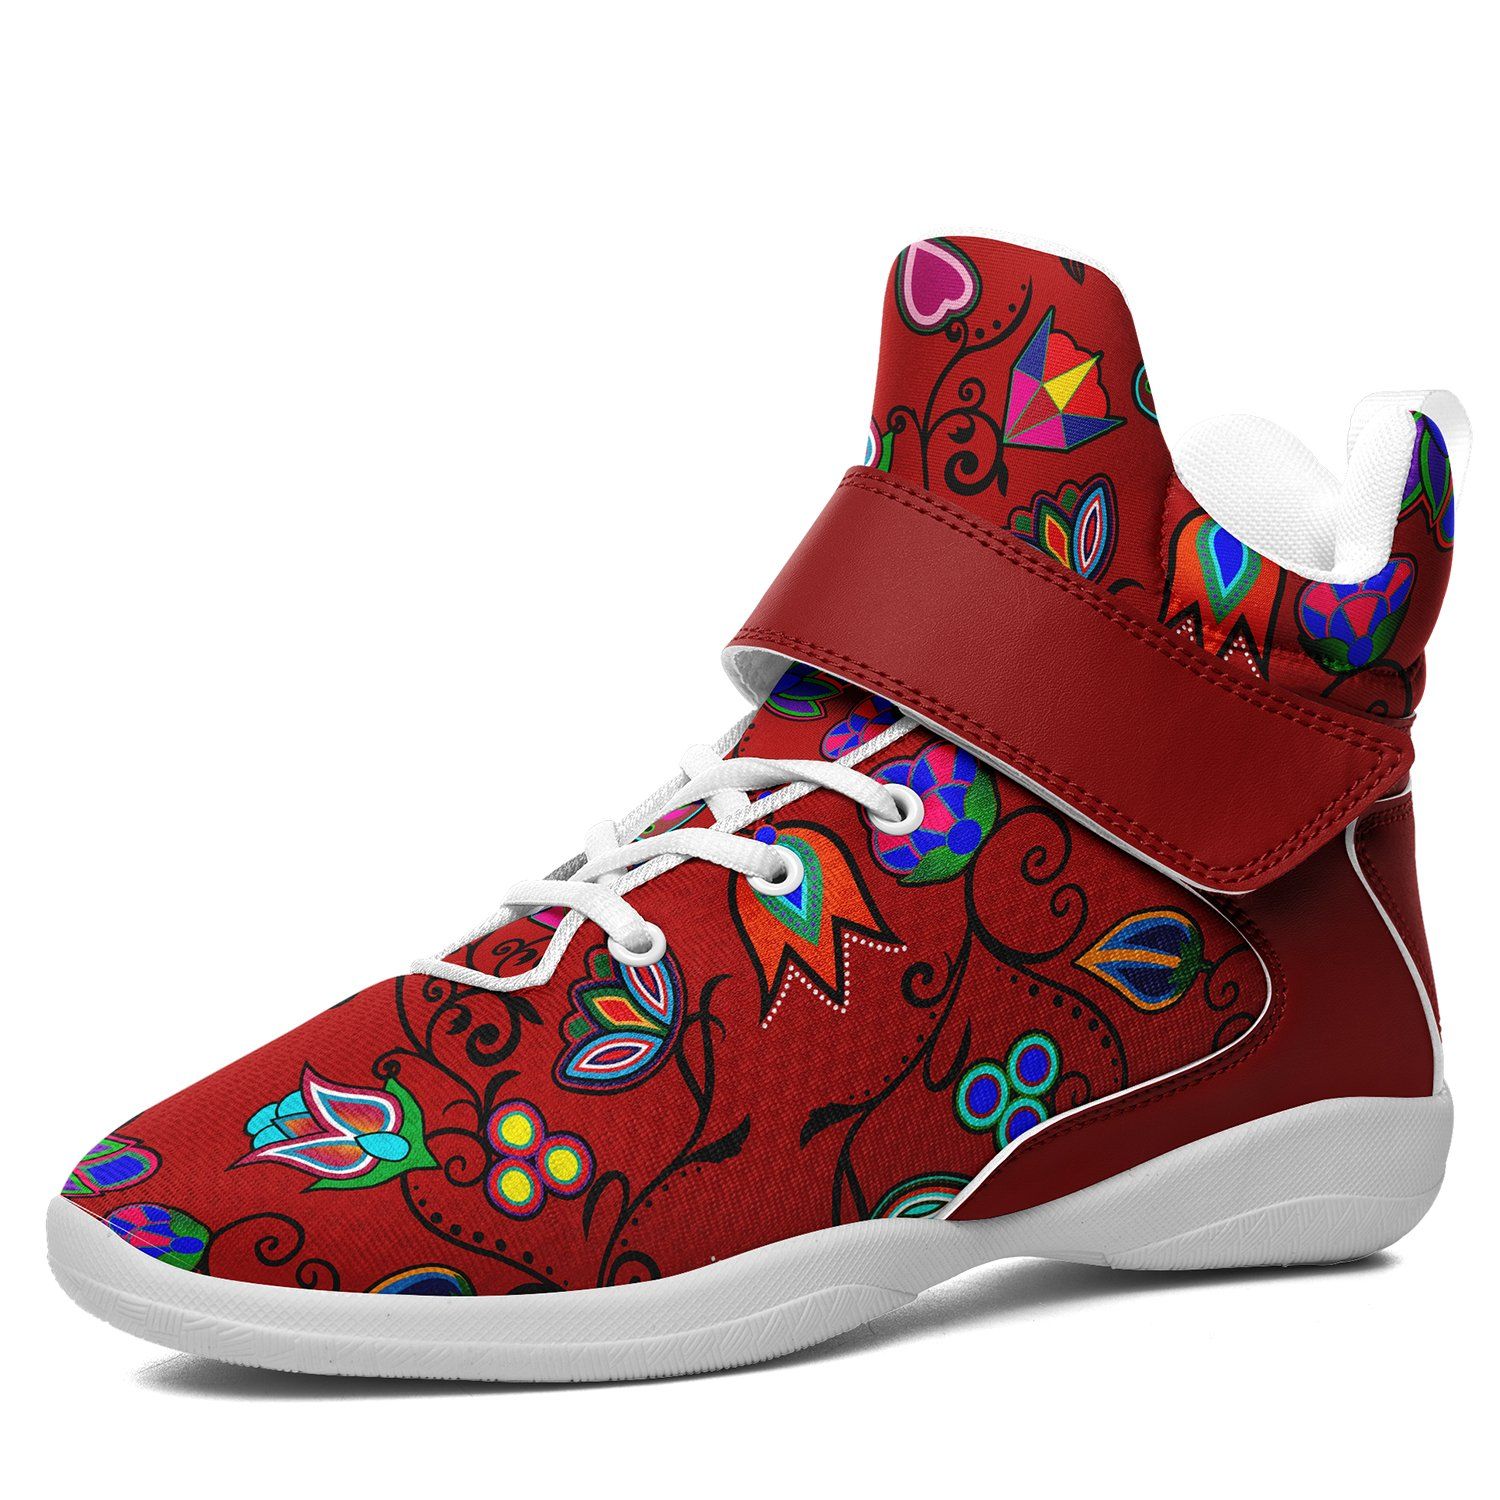 Indigenous Paisley Dahlia Ipottaa Basketball / Sport High Top Shoes 49 Dzine US Women 4.5 / US Youth 3.5 / EUR 35 White Sole with Dark Red Strap 